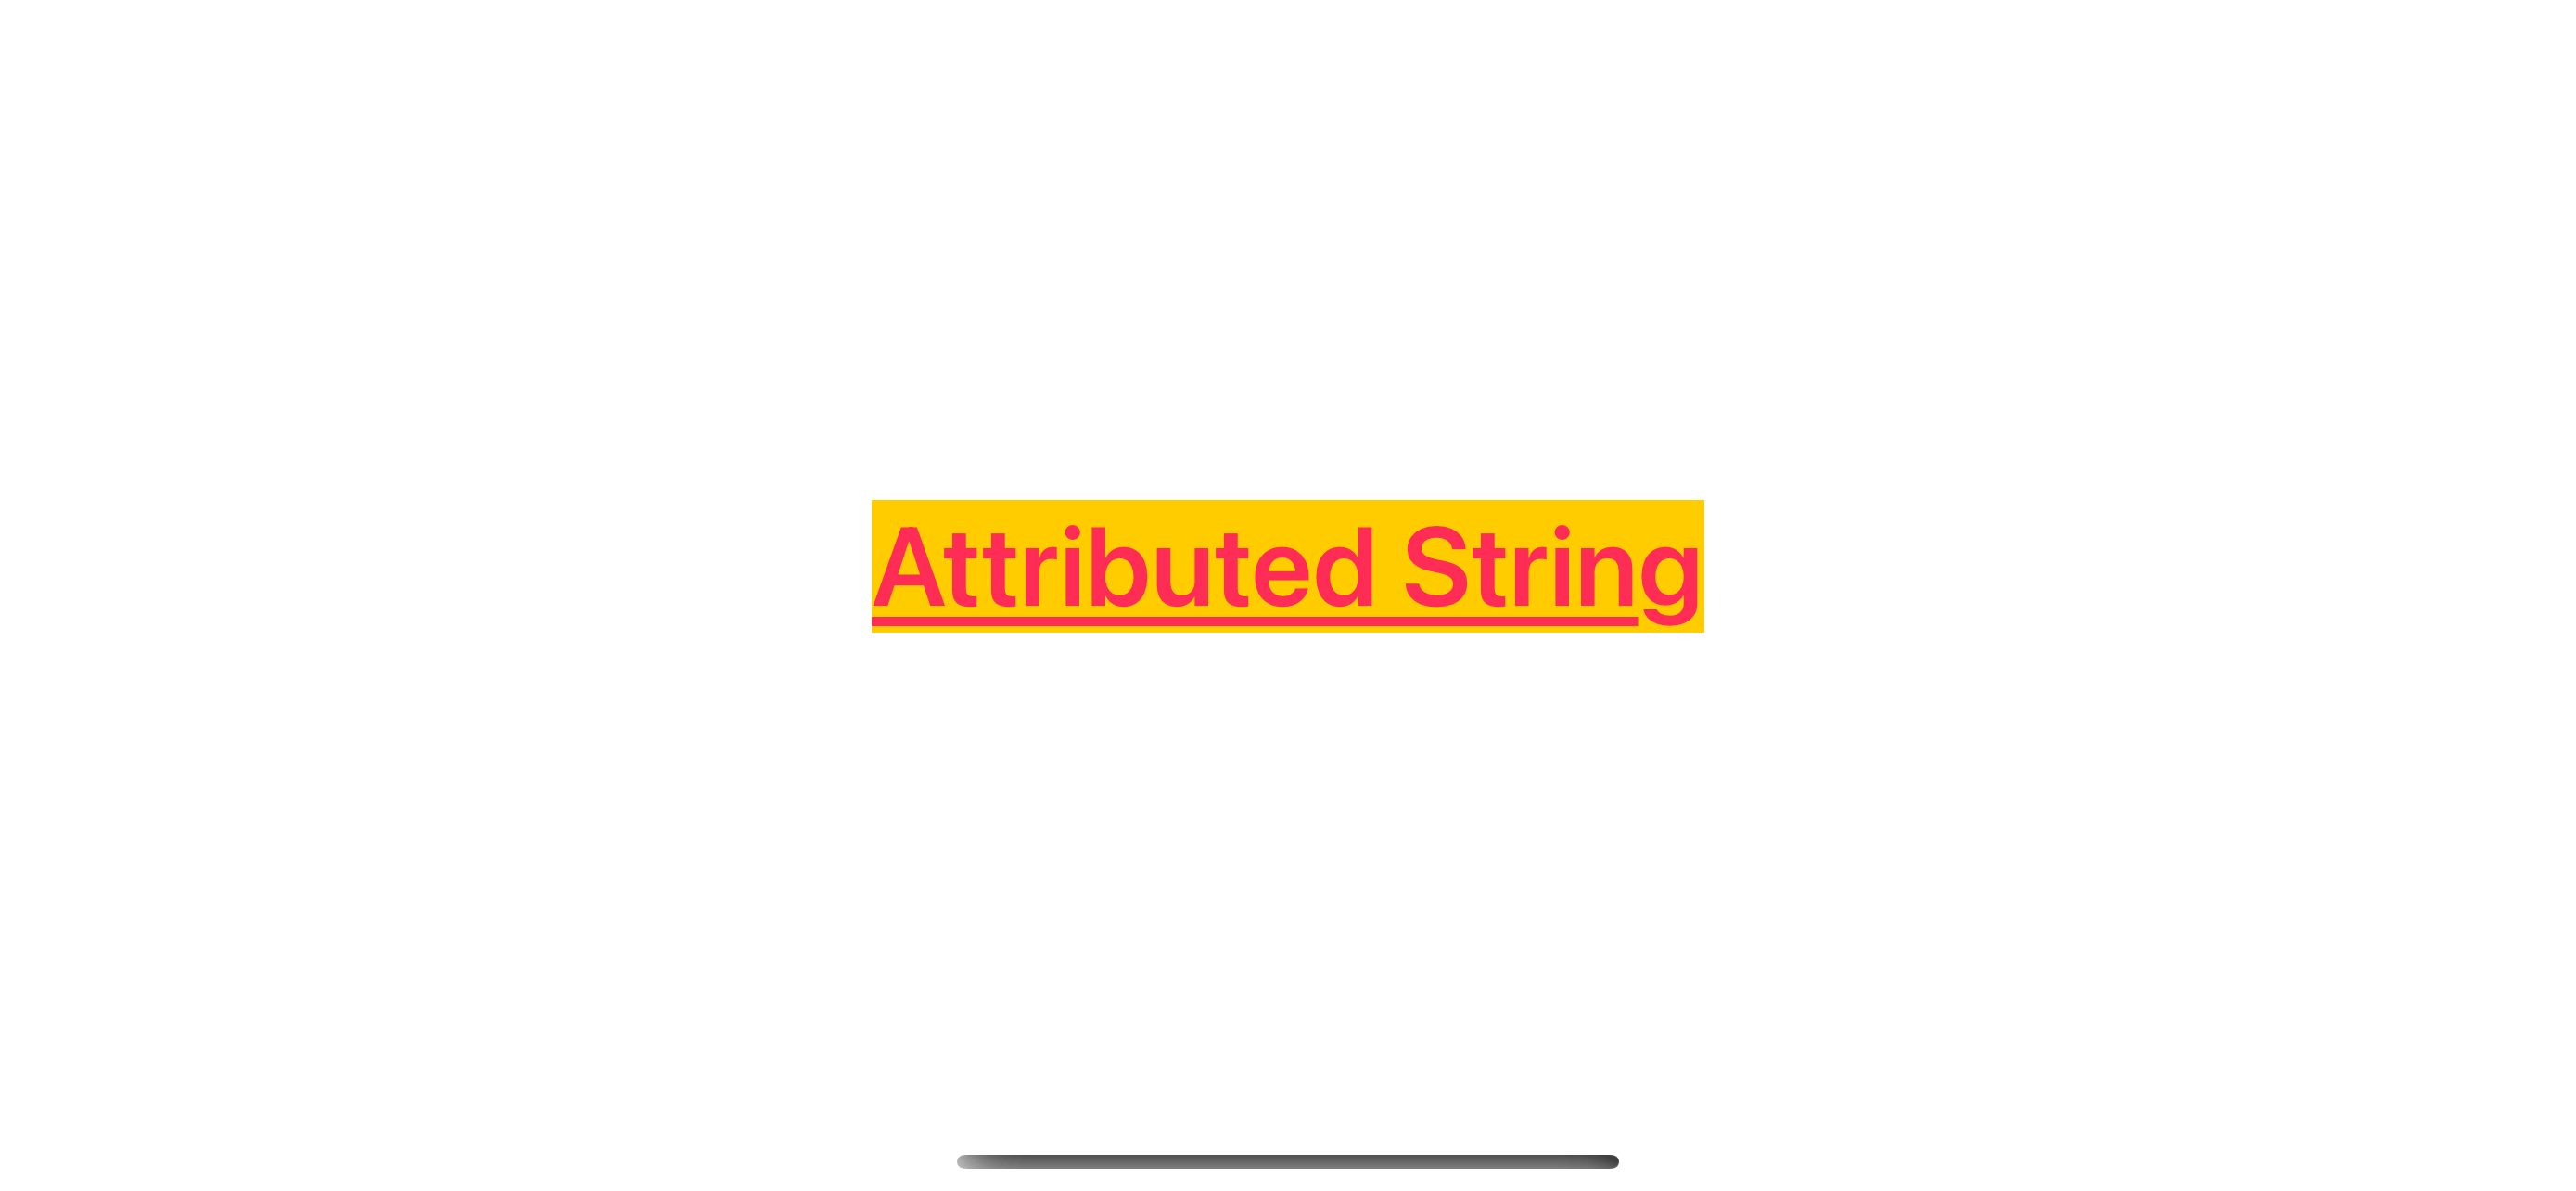 Create an AttributedString from a string and customize its appearance via properties.